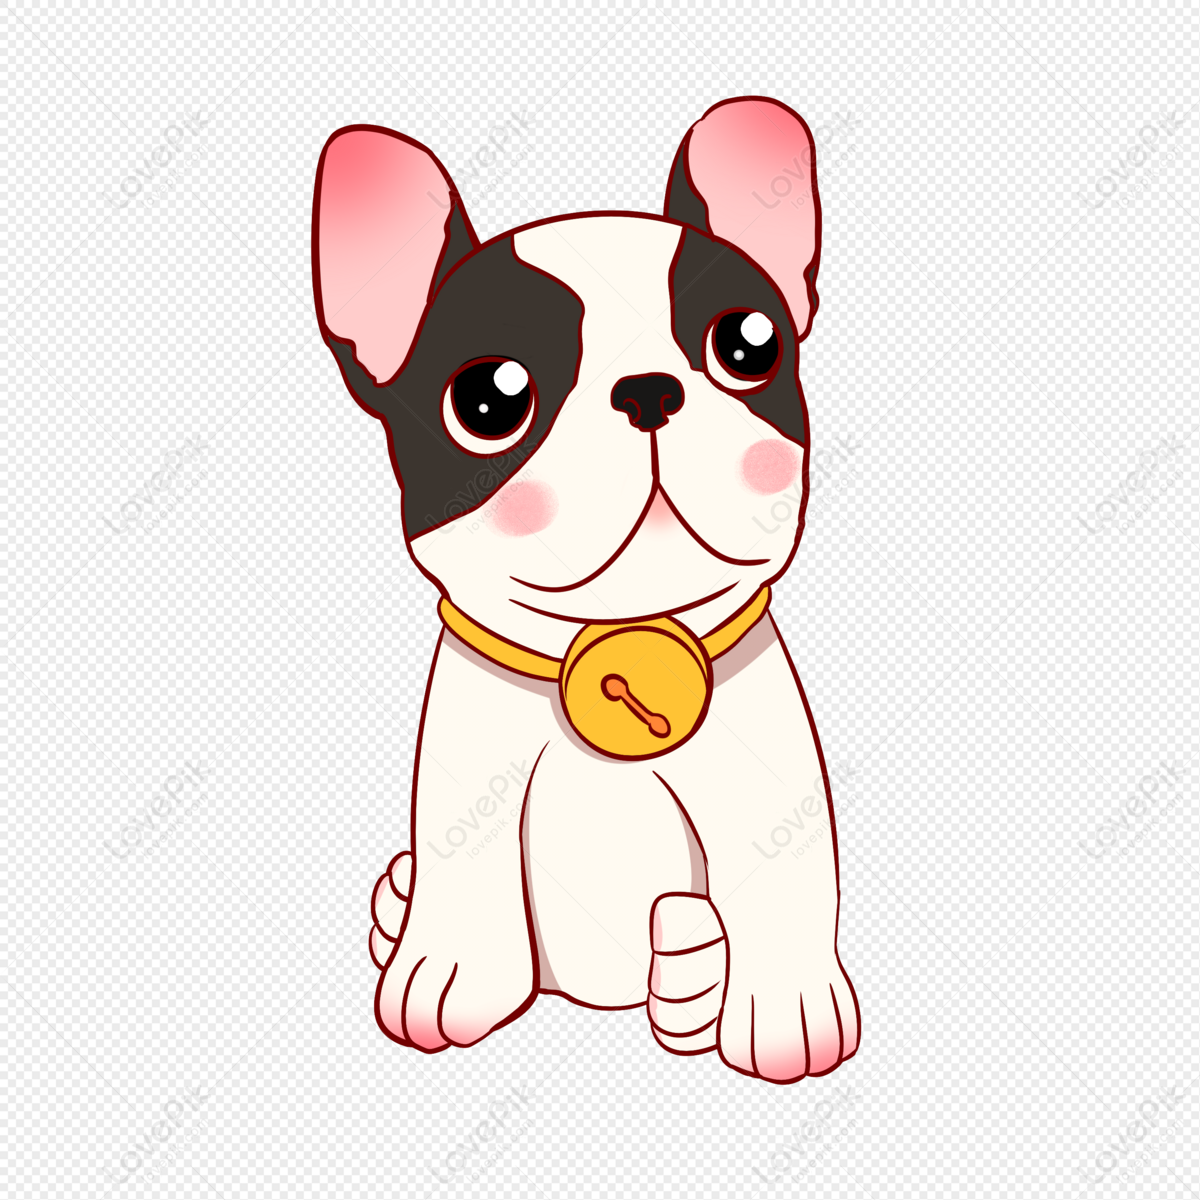 Single Dog Cartoon Image PNG Transparent Background And Clipart Image For  Free Download - Lovepik | 401869900